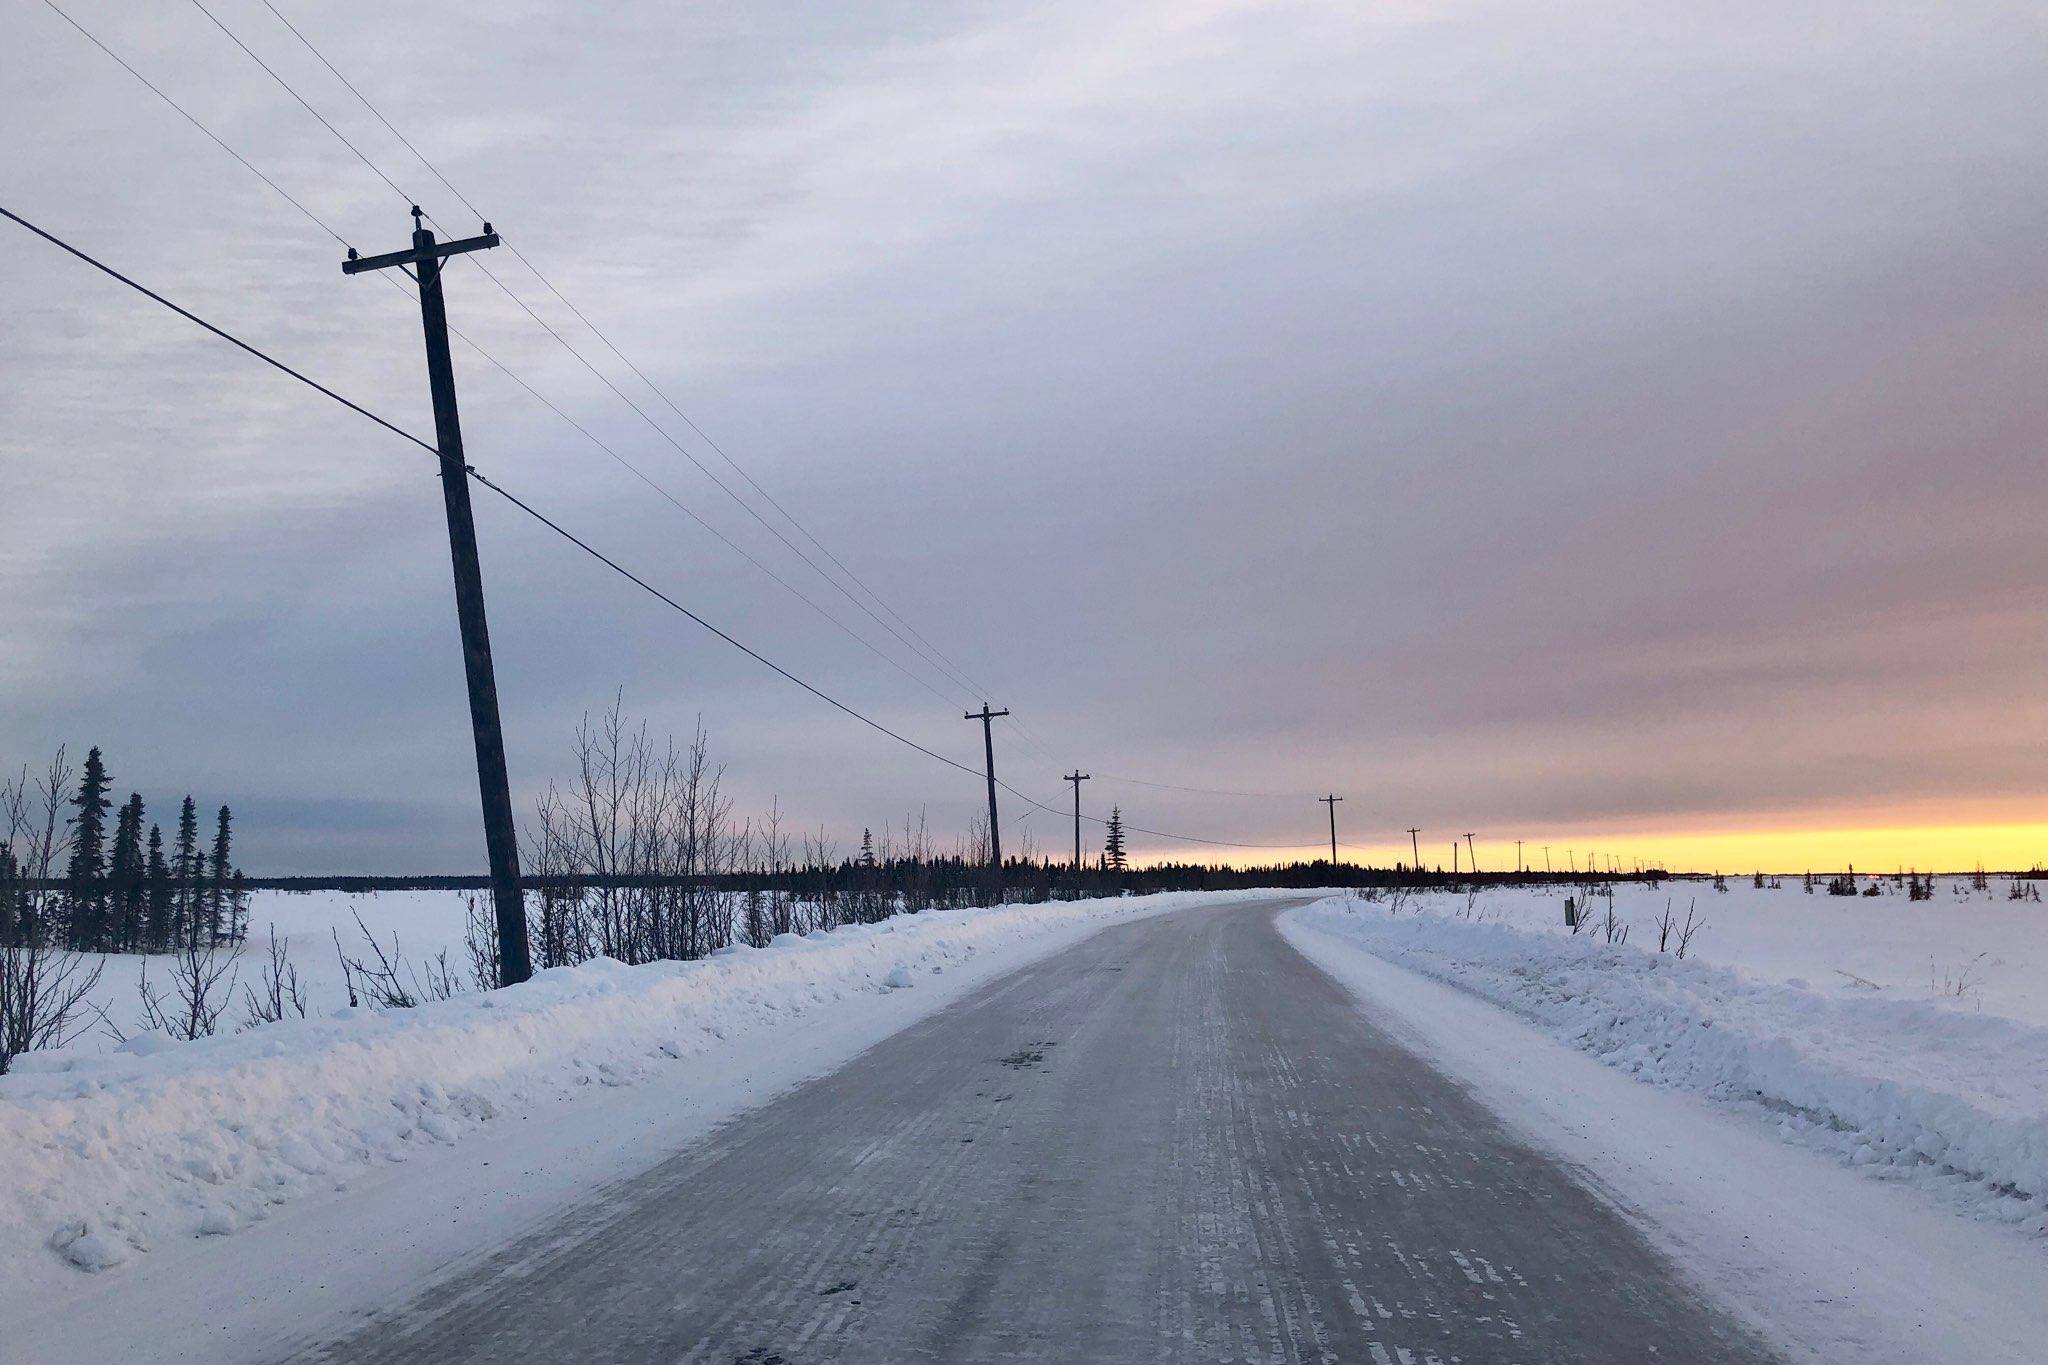 Escape Route, a road connecting the towns of Kenai and Nikiski on the Kenai Peninsula in Alaska, is photographed on Thursday, Feb. 14, 2019. (Photo by Victoria Petersen/Peninsula Clarion)